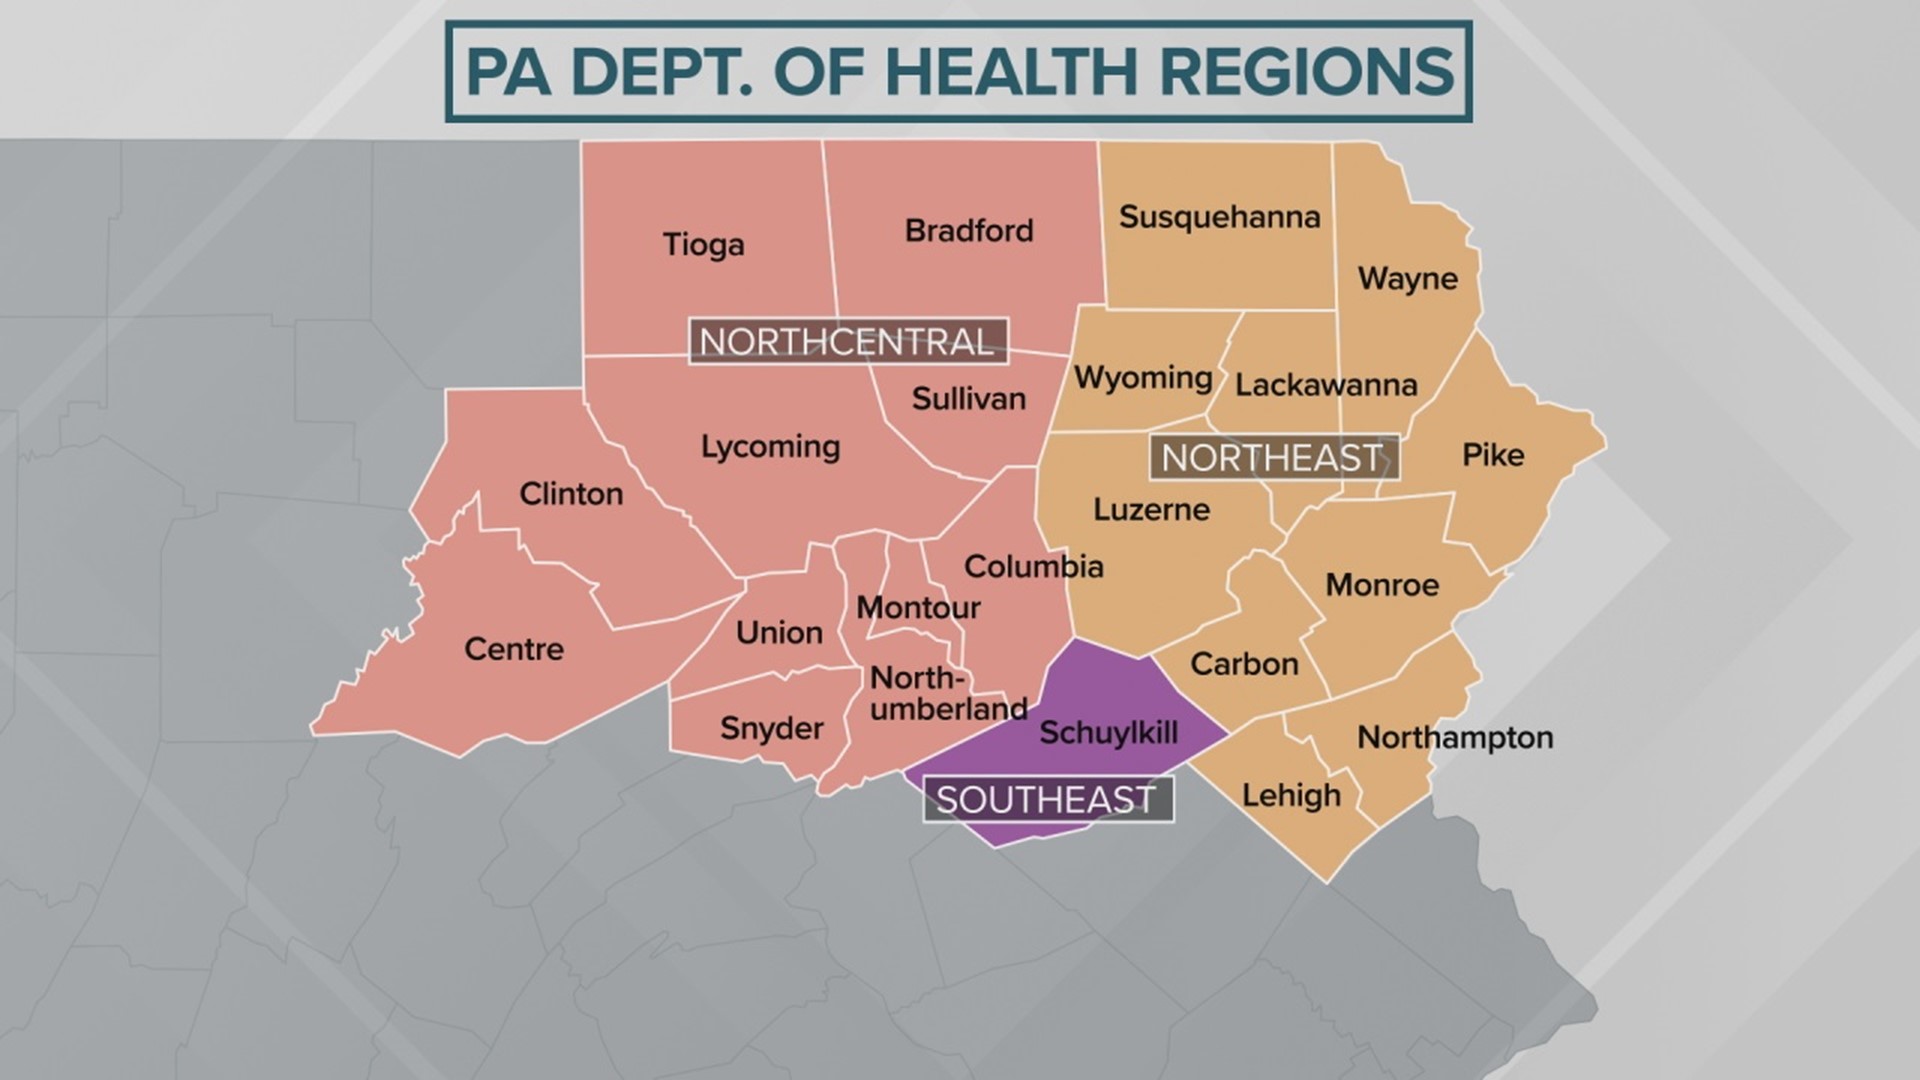 The state Department of Health has broken down Northeastern and Central Pennsylvania into regions for years. Schuylkill County is the only county not included.